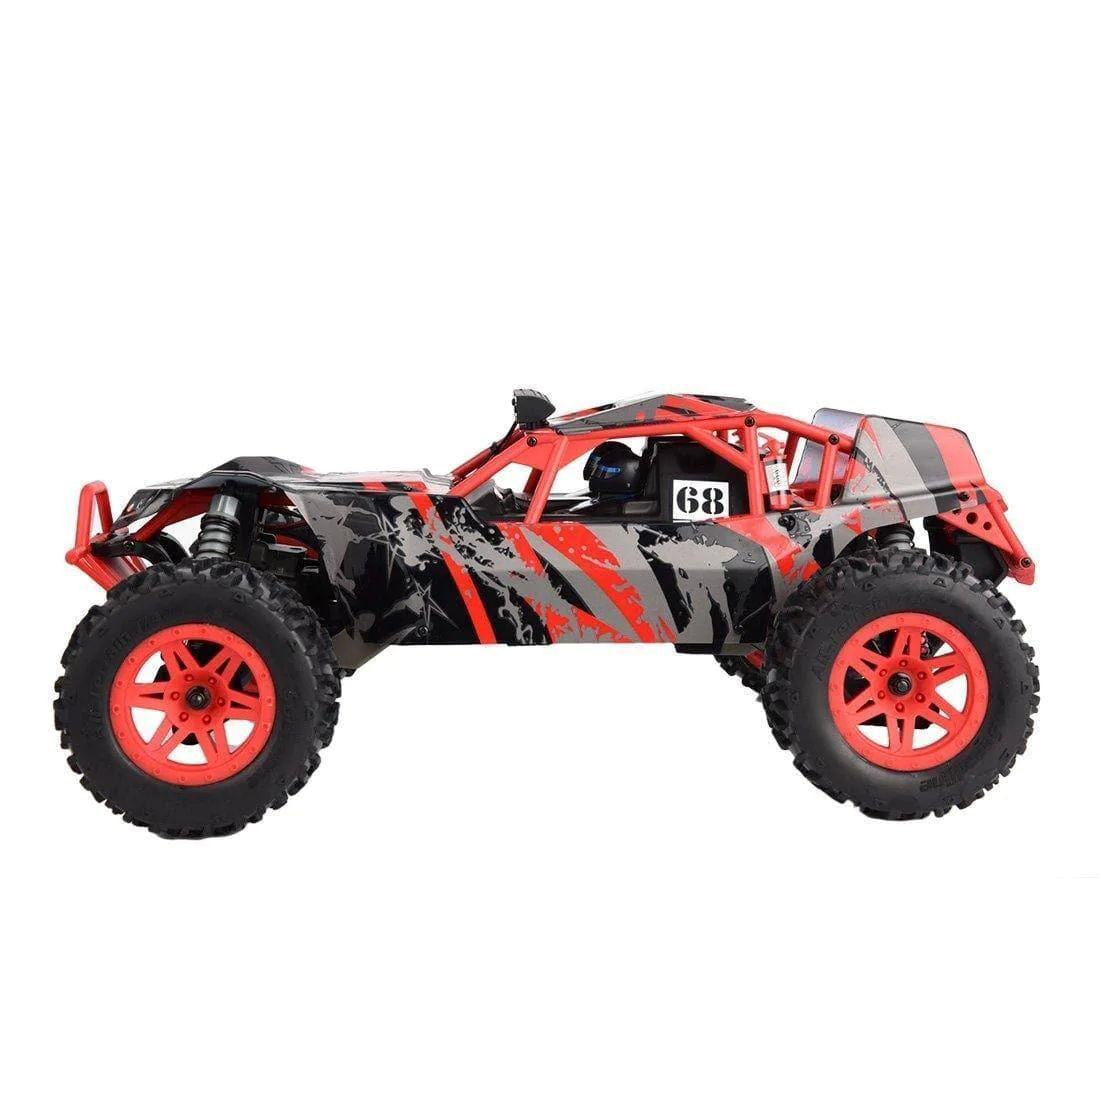 RC Car FS Racing 53608 1/10 4WD High-speed Desert Off-road Vehicle Rally Car